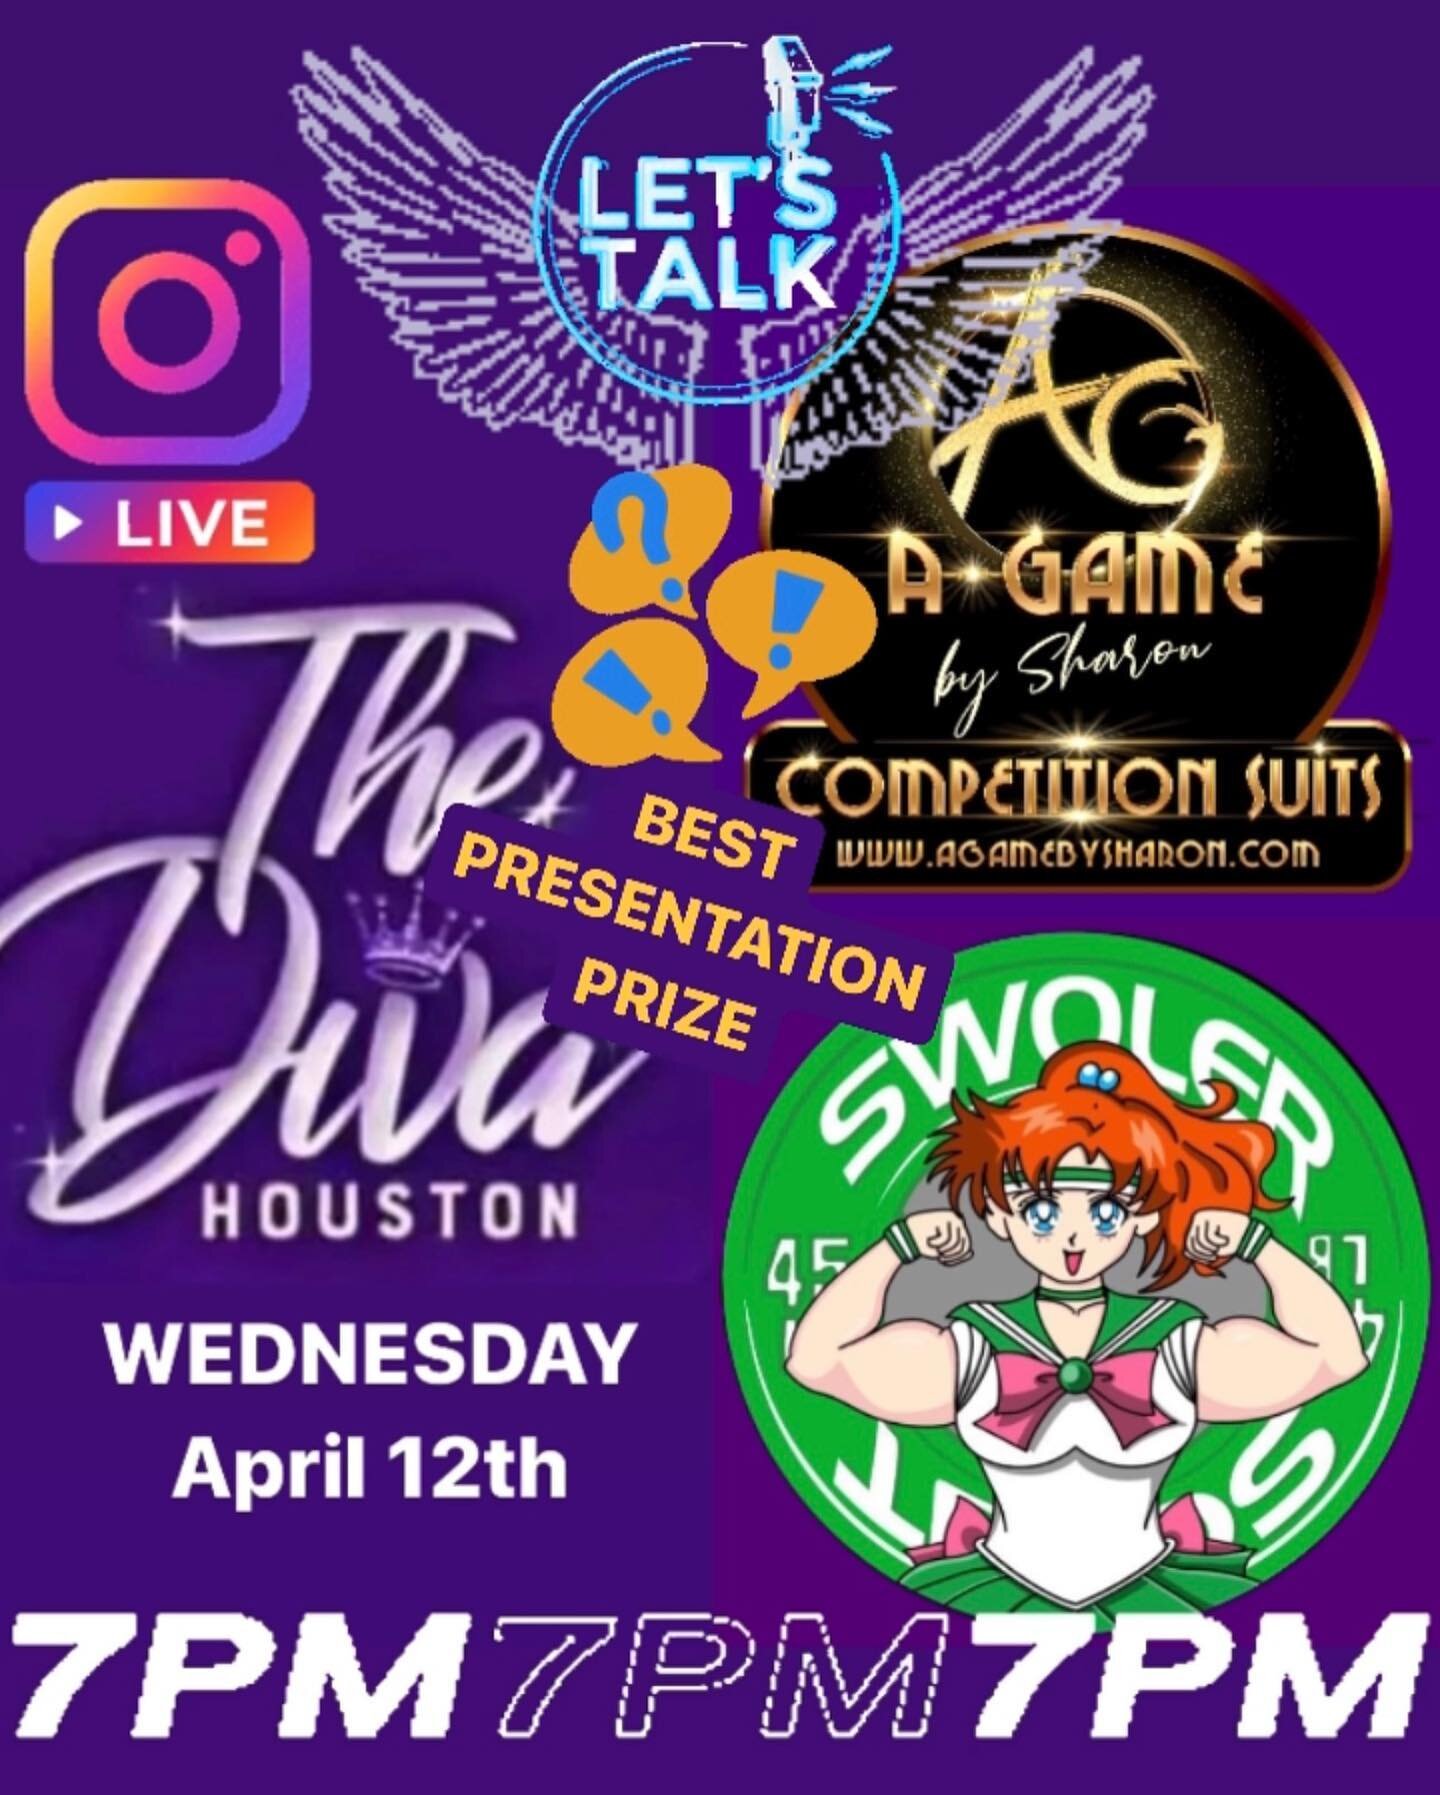 LIVE ON INSTAGRAM‼️ Wednesday April 12th 7pm with @the_diva_houston @agame_by_sharon @swolerscout 
🗣️ON-X Naturals Diva Houston Show JUNE 10th
🗣️Designer Collab under A-Game by Sharon with SwolerScout
🗣️WINGS DIVISION (aka Angels Division w/otger 